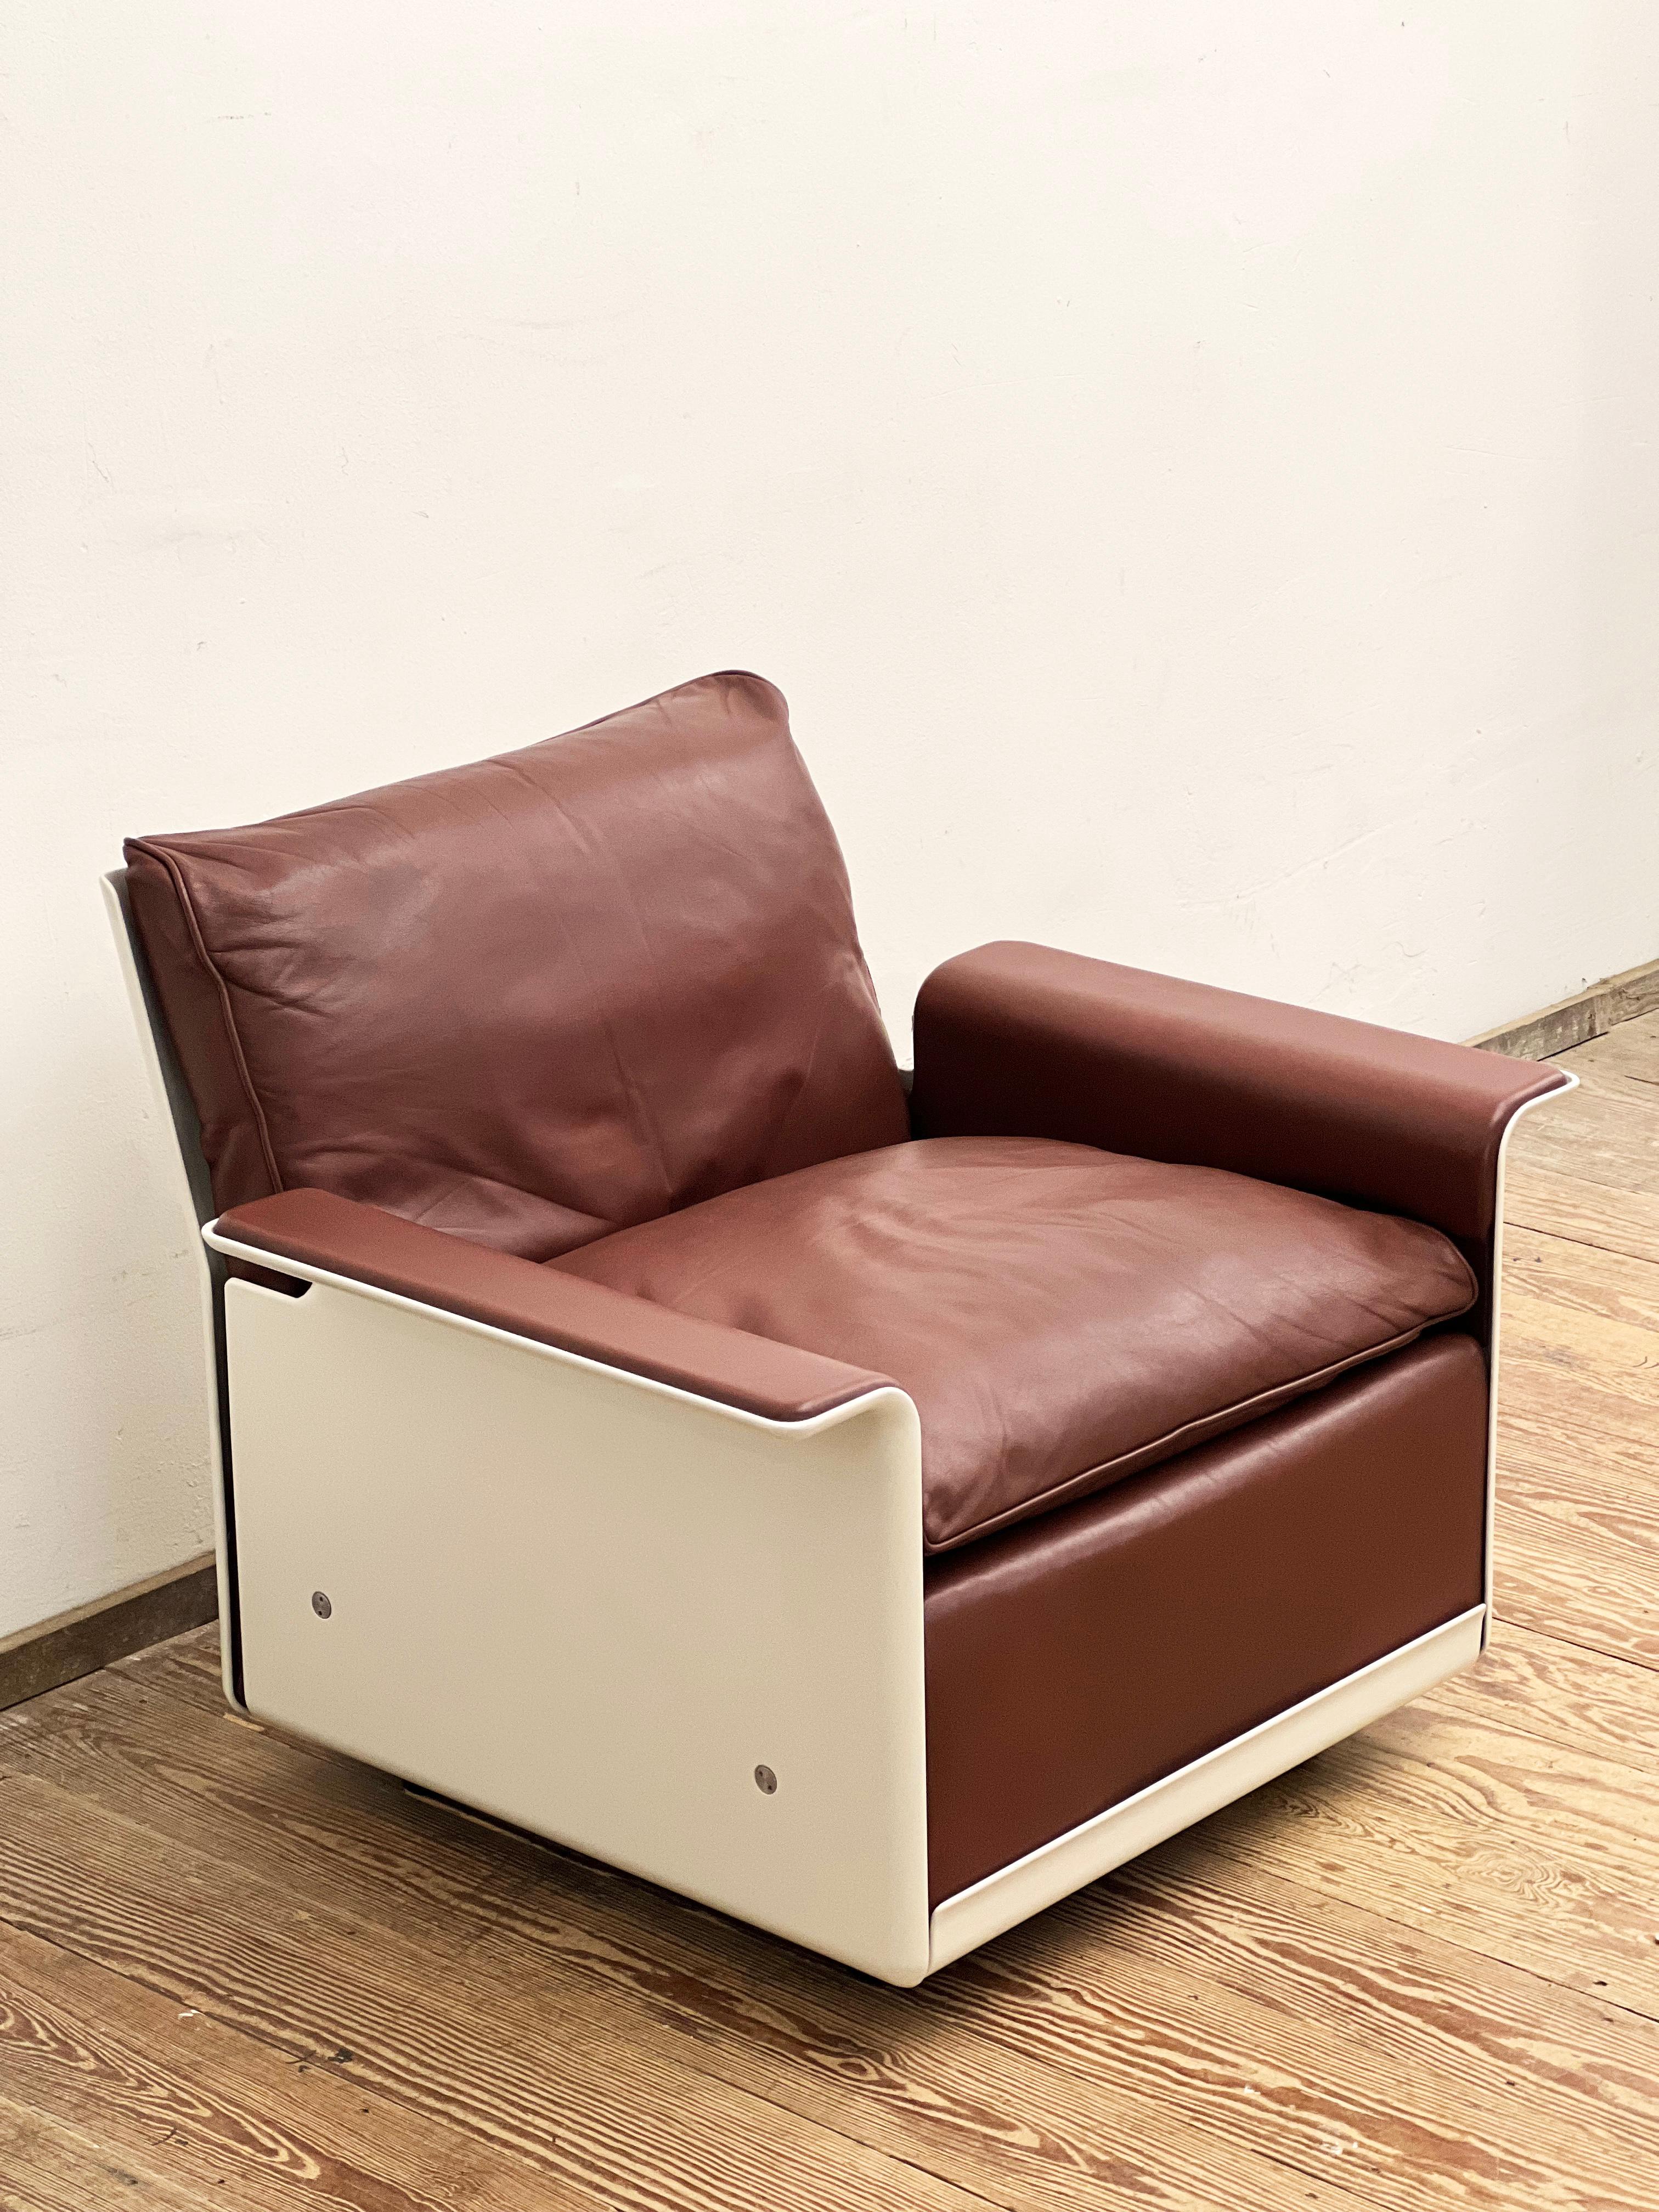 Mid-Century Lounge or Armchair by Dieter Rams for Vitsoe, German Design, 1960s For Sale 3